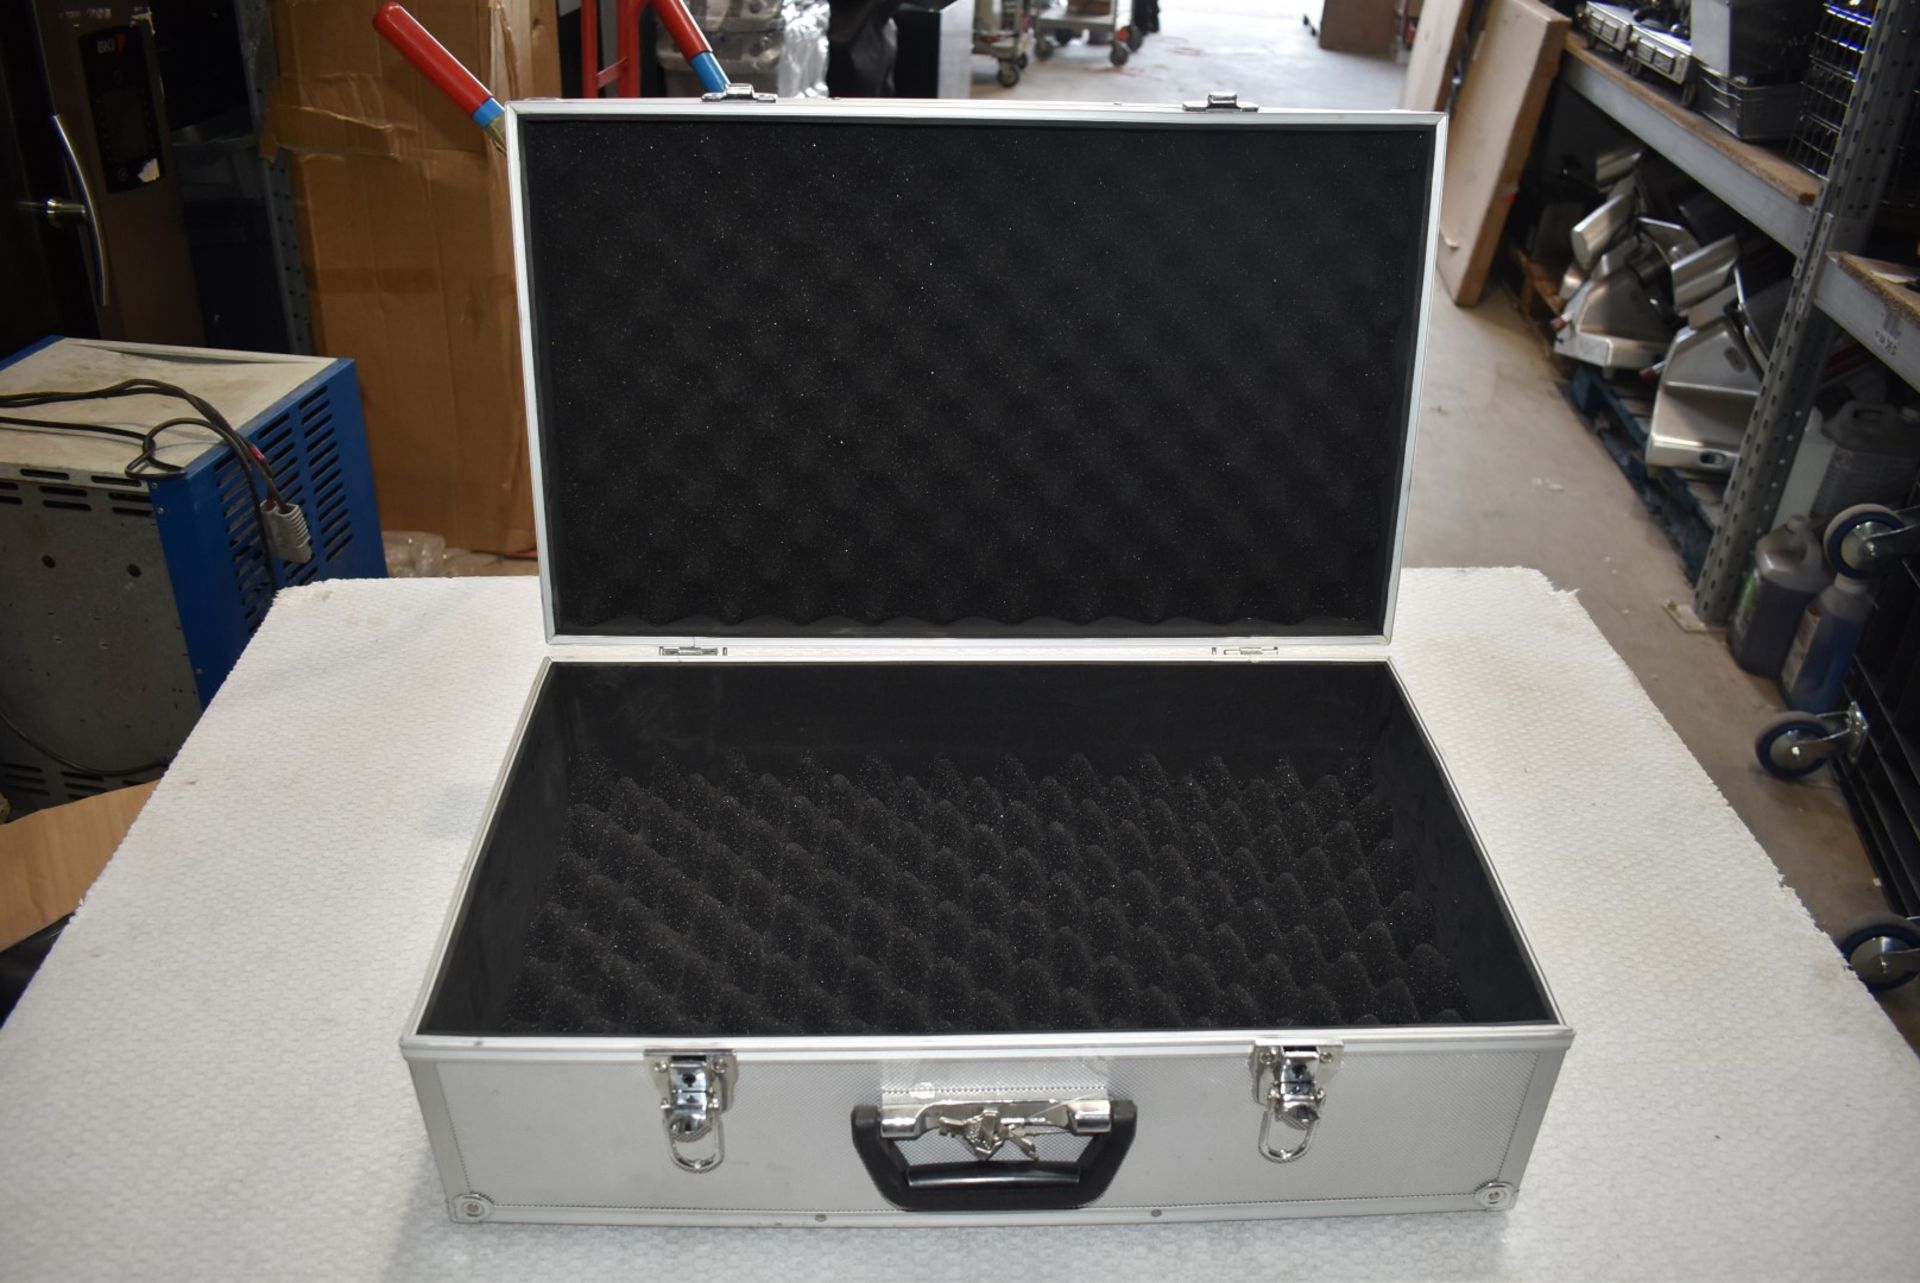 1 x Foam Padded Heavy Duty Transit Case - With Lock and Key - Size: 58 x 35 x 20 cms - Image 3 of 4